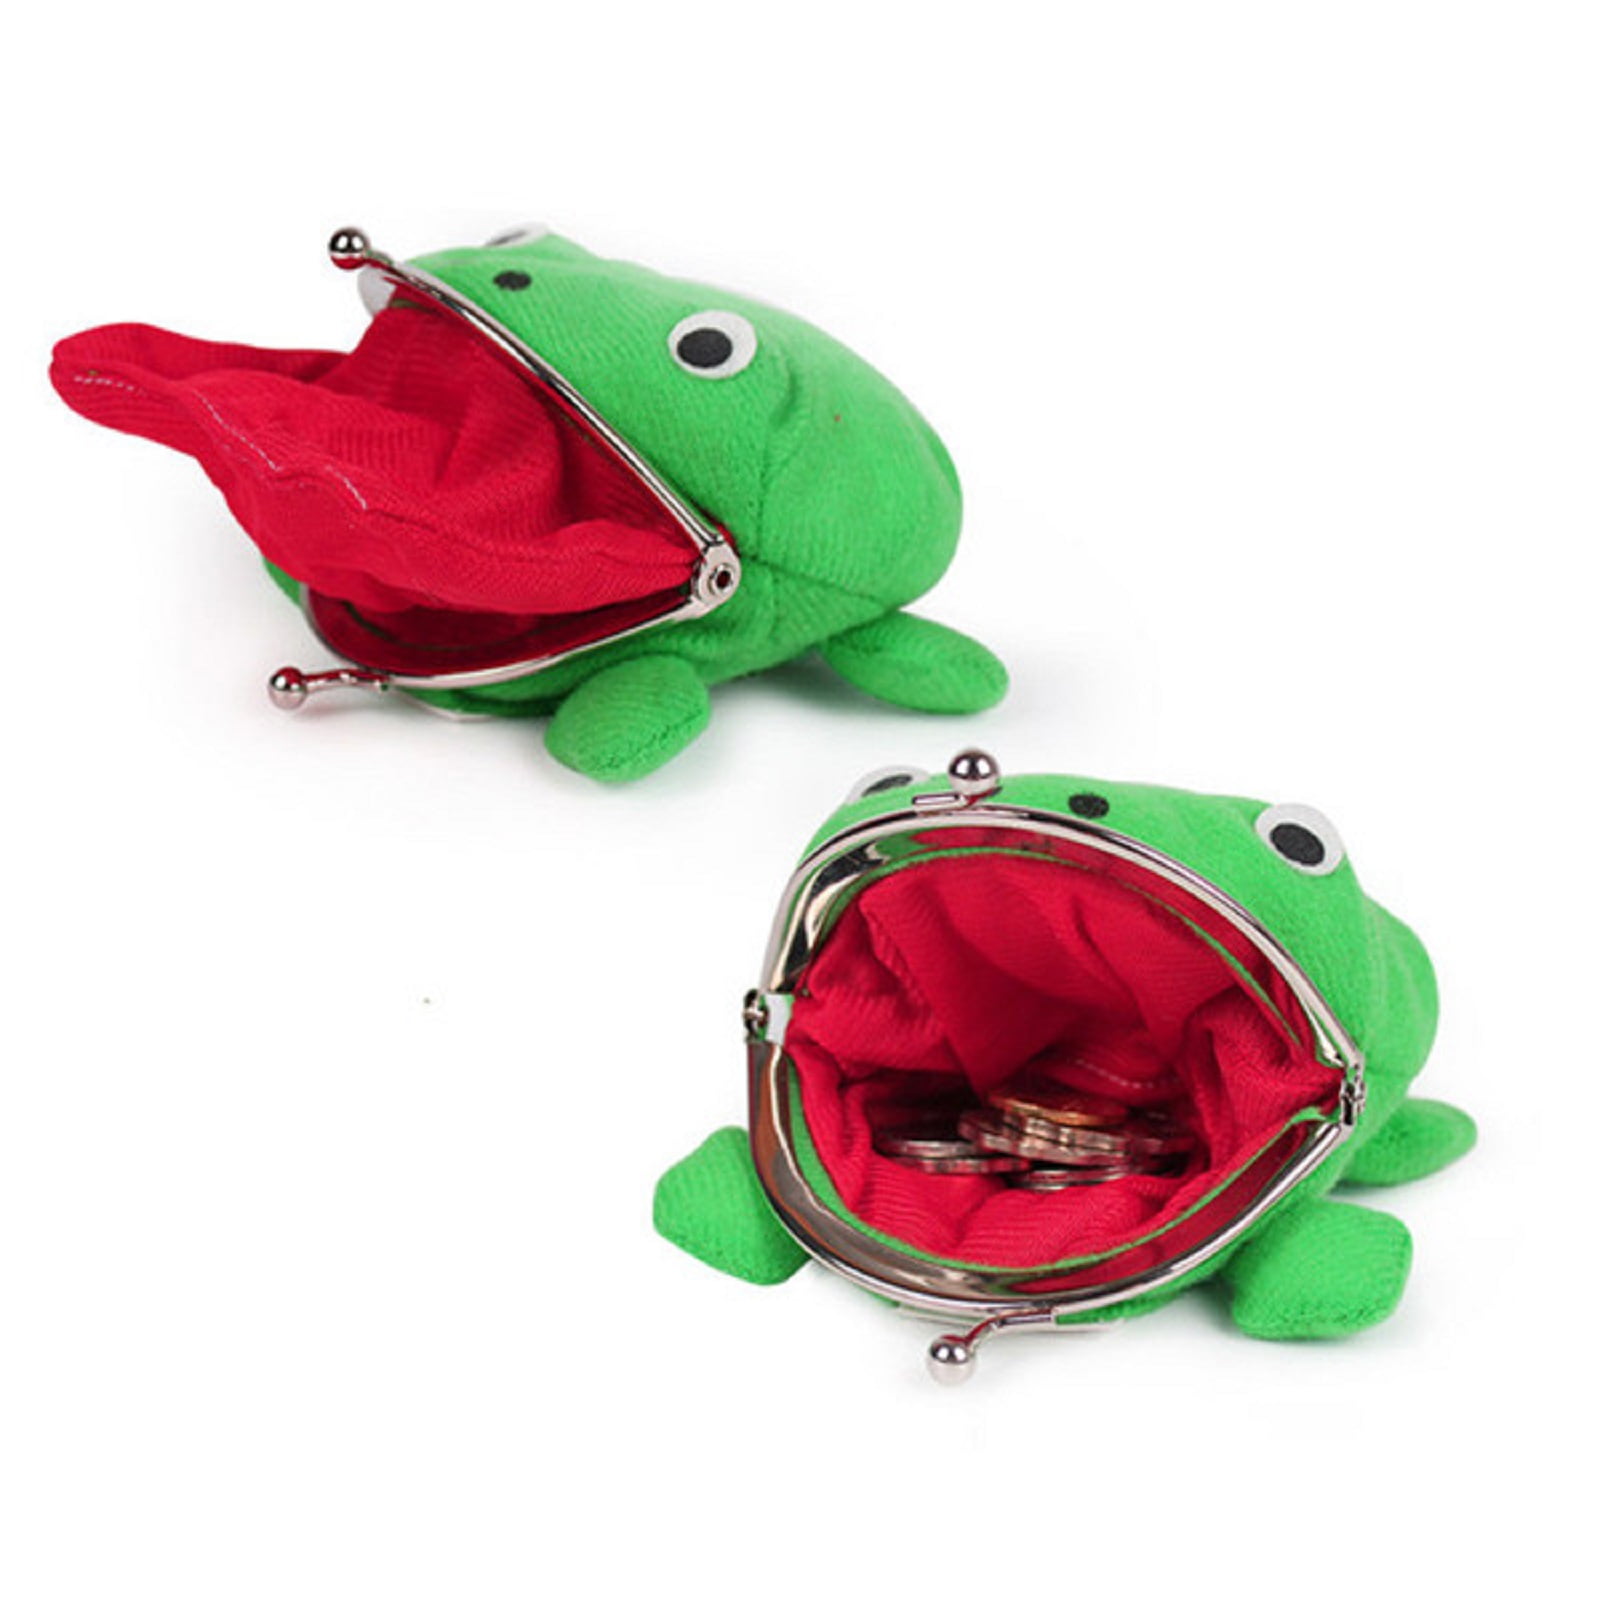 1pc Frog Coin Wallets Cartoon Animal Wallet Coin Bag Cute Mini Pouch Key Credit Card Holder Novelty Toy School Stationery Christmas Gift for Kids